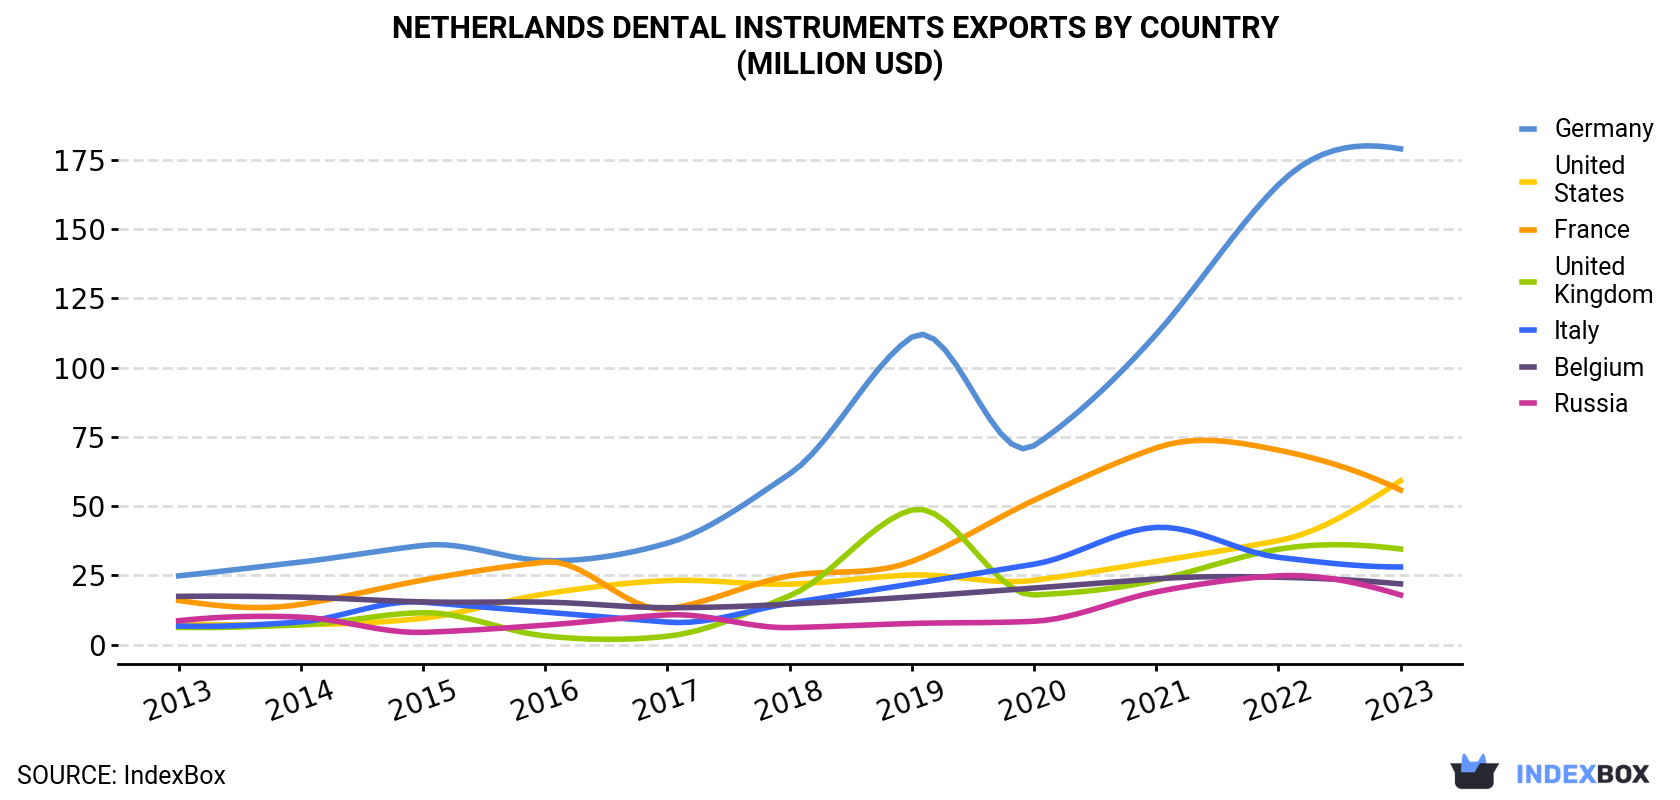 Netherlands Dental Instruments Exports By Country (Million USD)